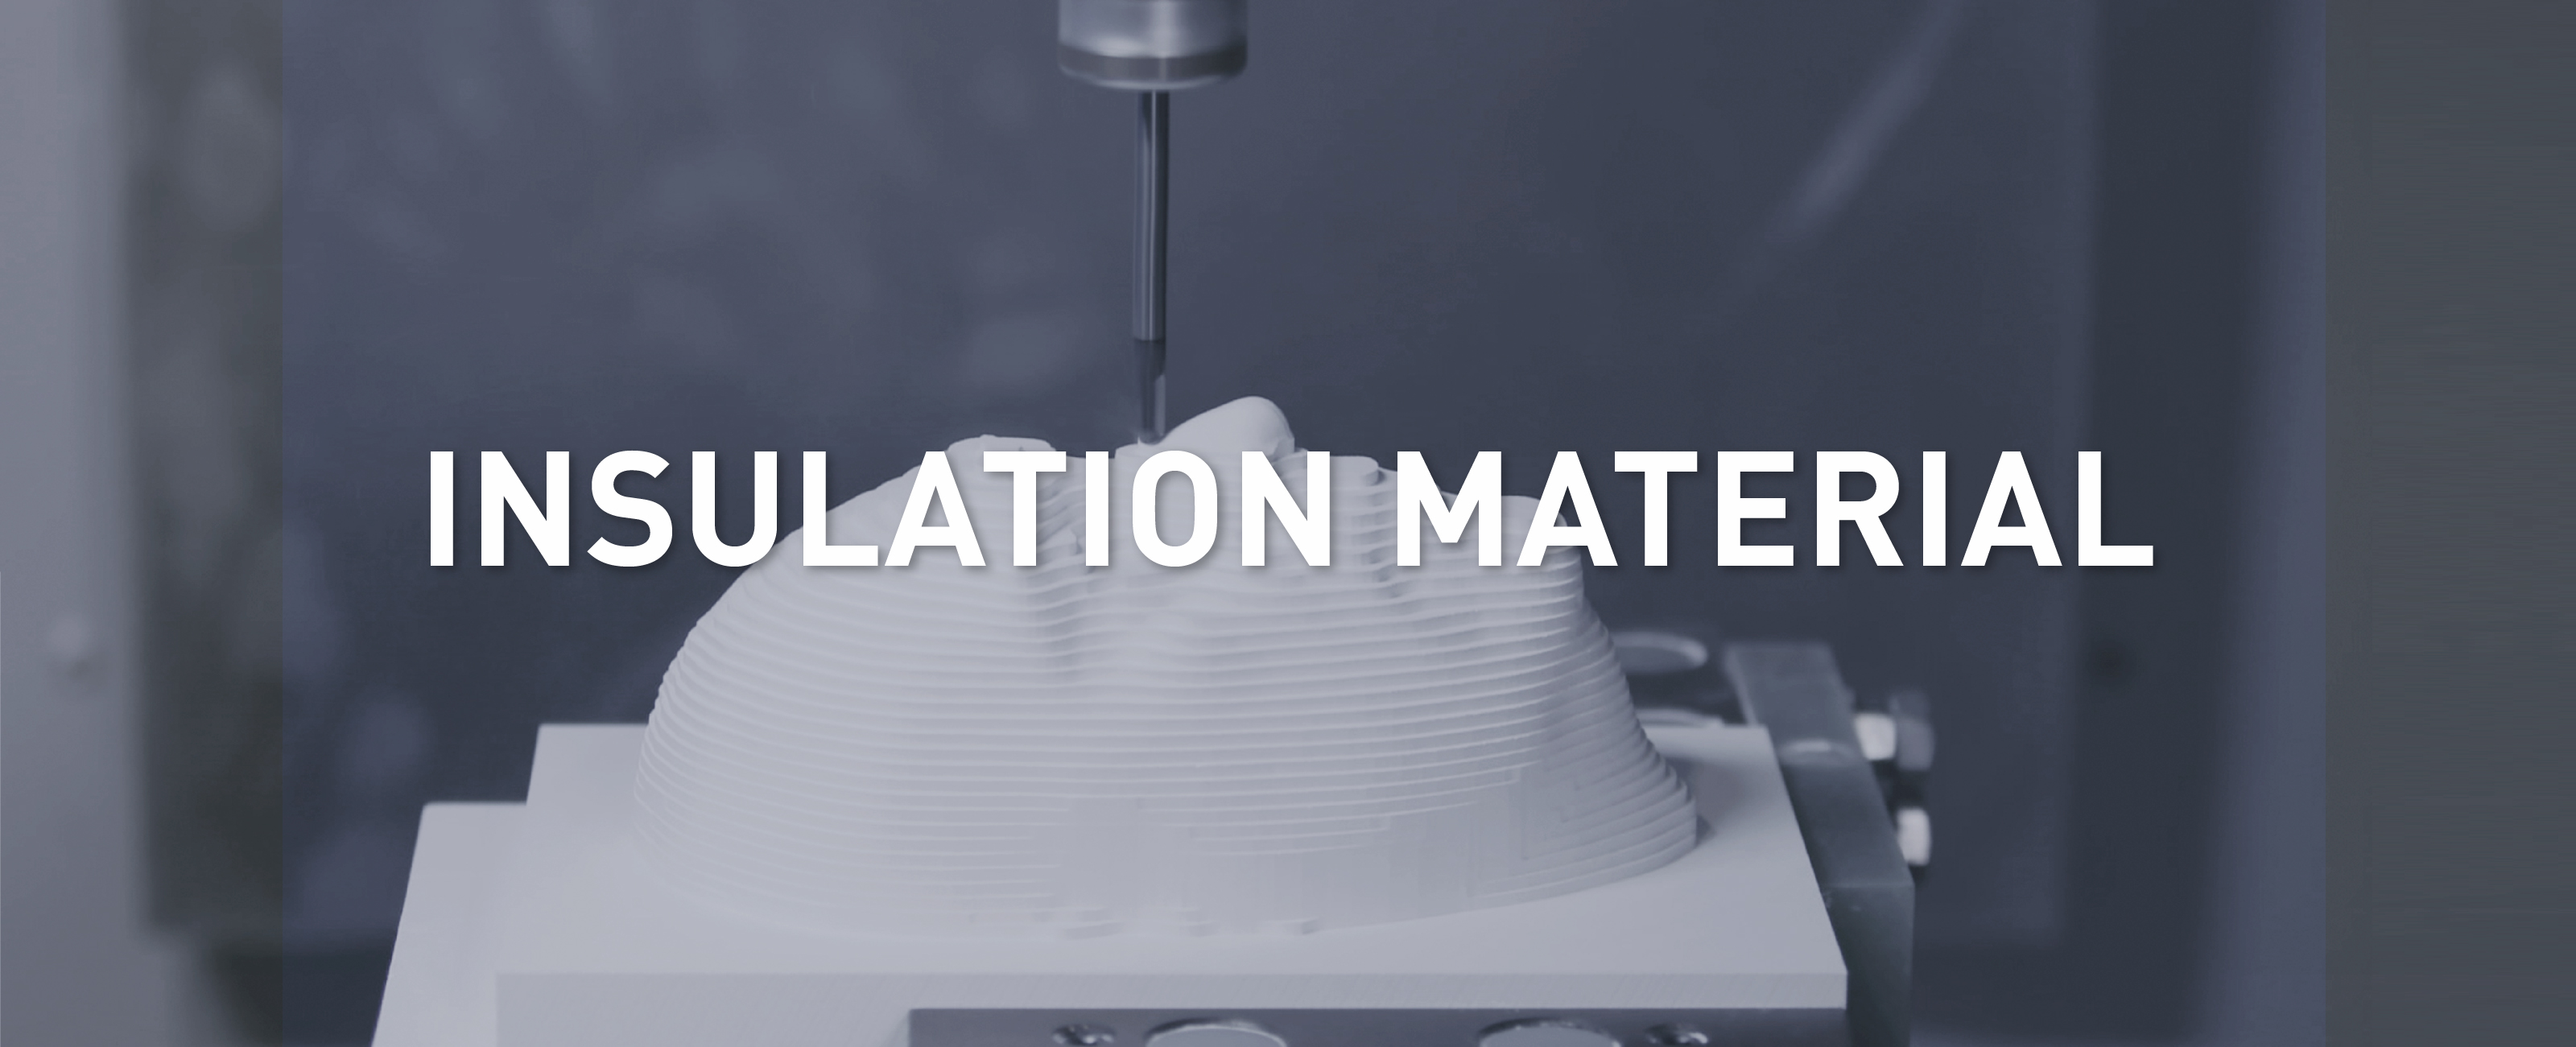 Insulationmaterial 